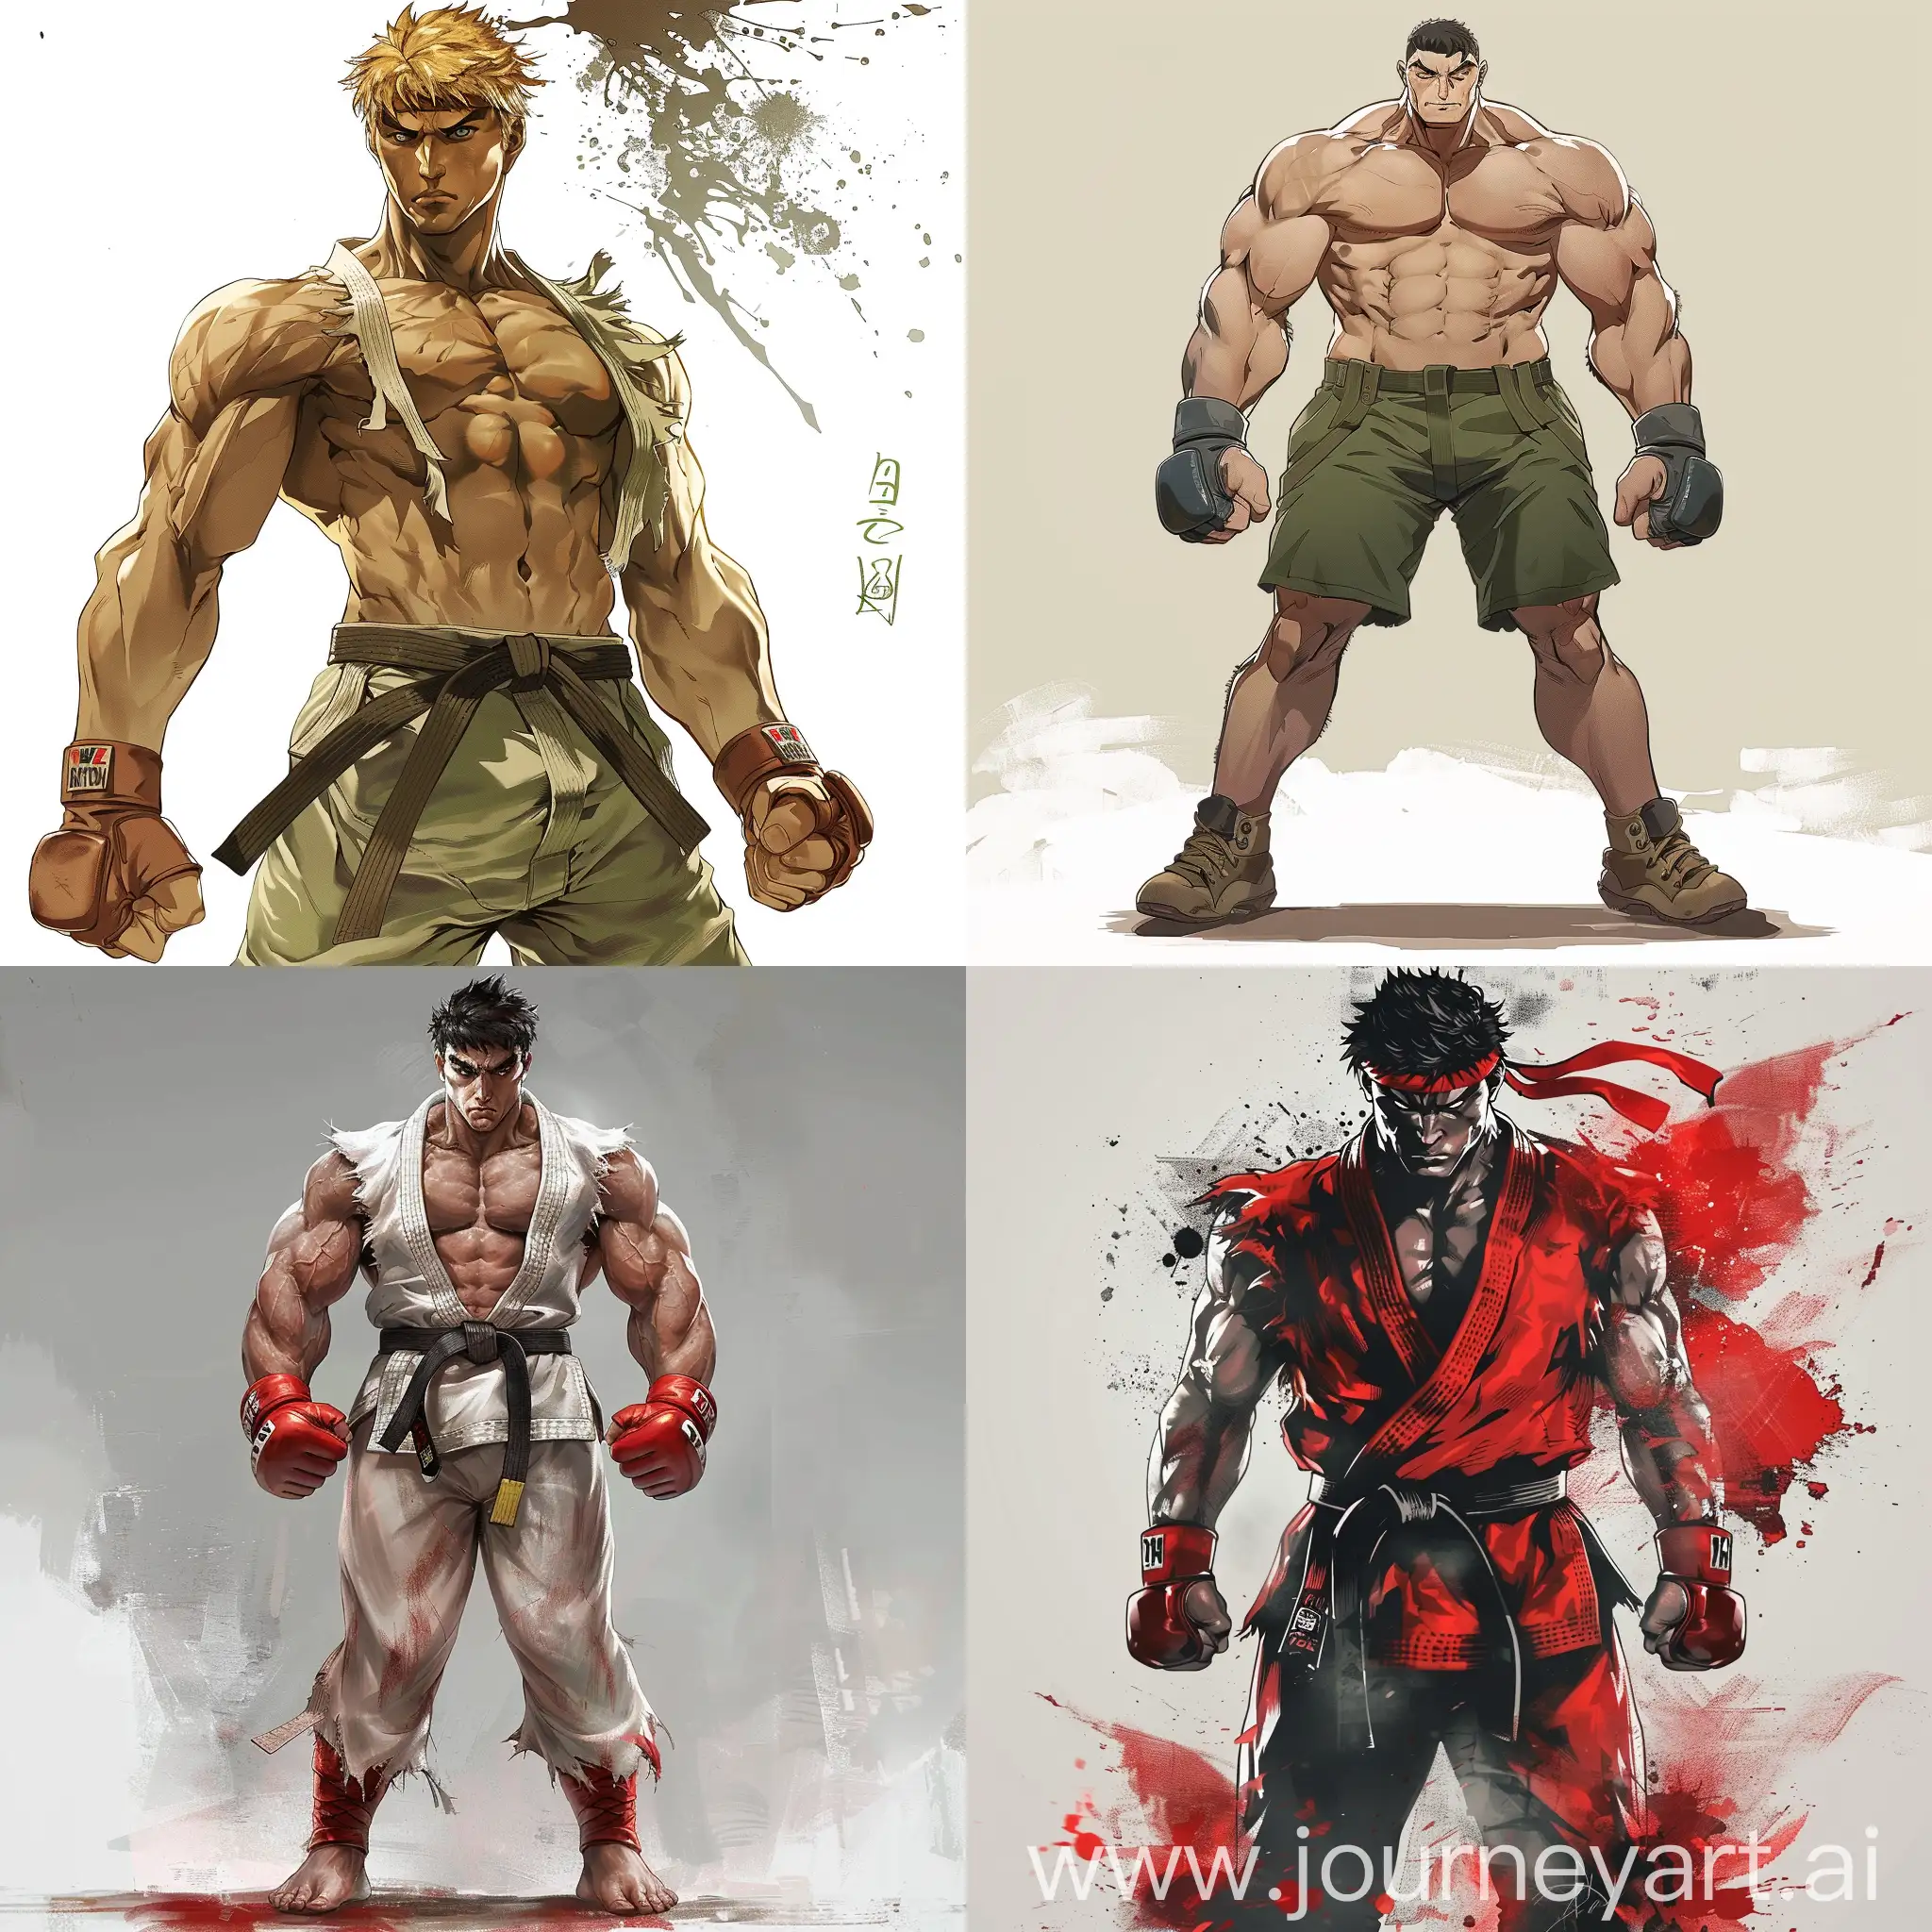 Street-Fighter-Anime-Art-Powerful-Fighter-in-Action